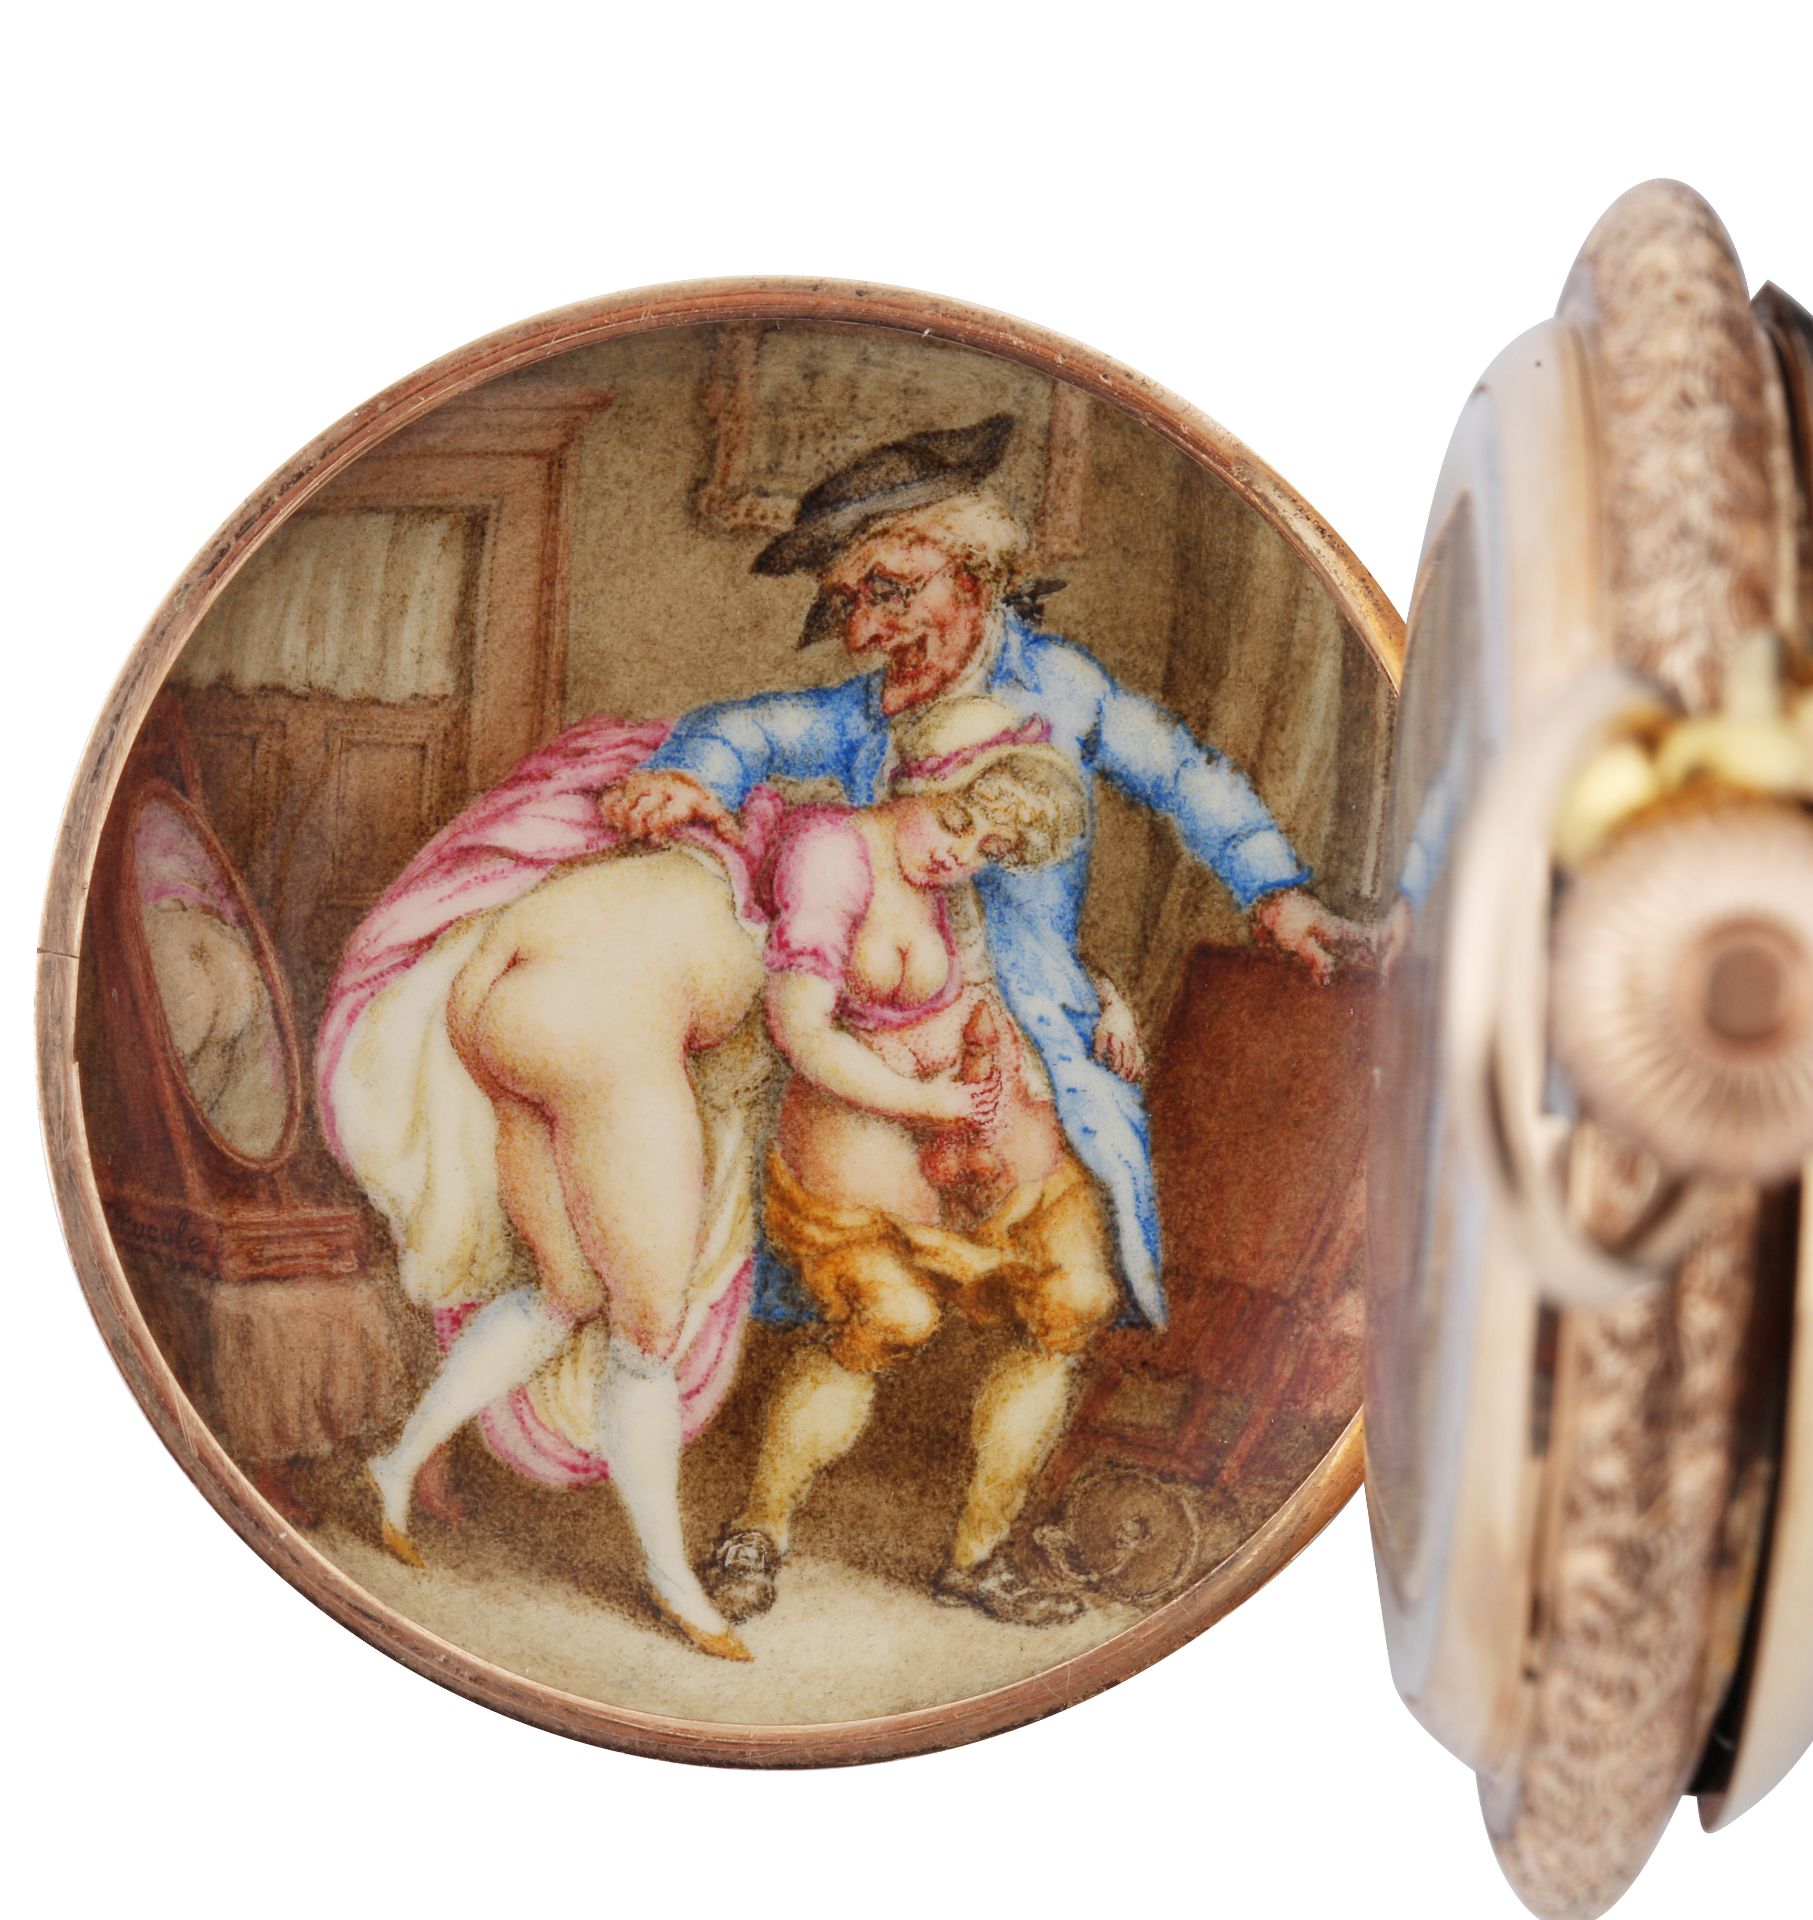 EROTIC AMERICAN WALTHAM 14K GOLD AND ENAMEL HUNTER CASE POCKET WATCH AND CHAIN, MOVEMENT NO. 5'506'7 - Image 2 of 7